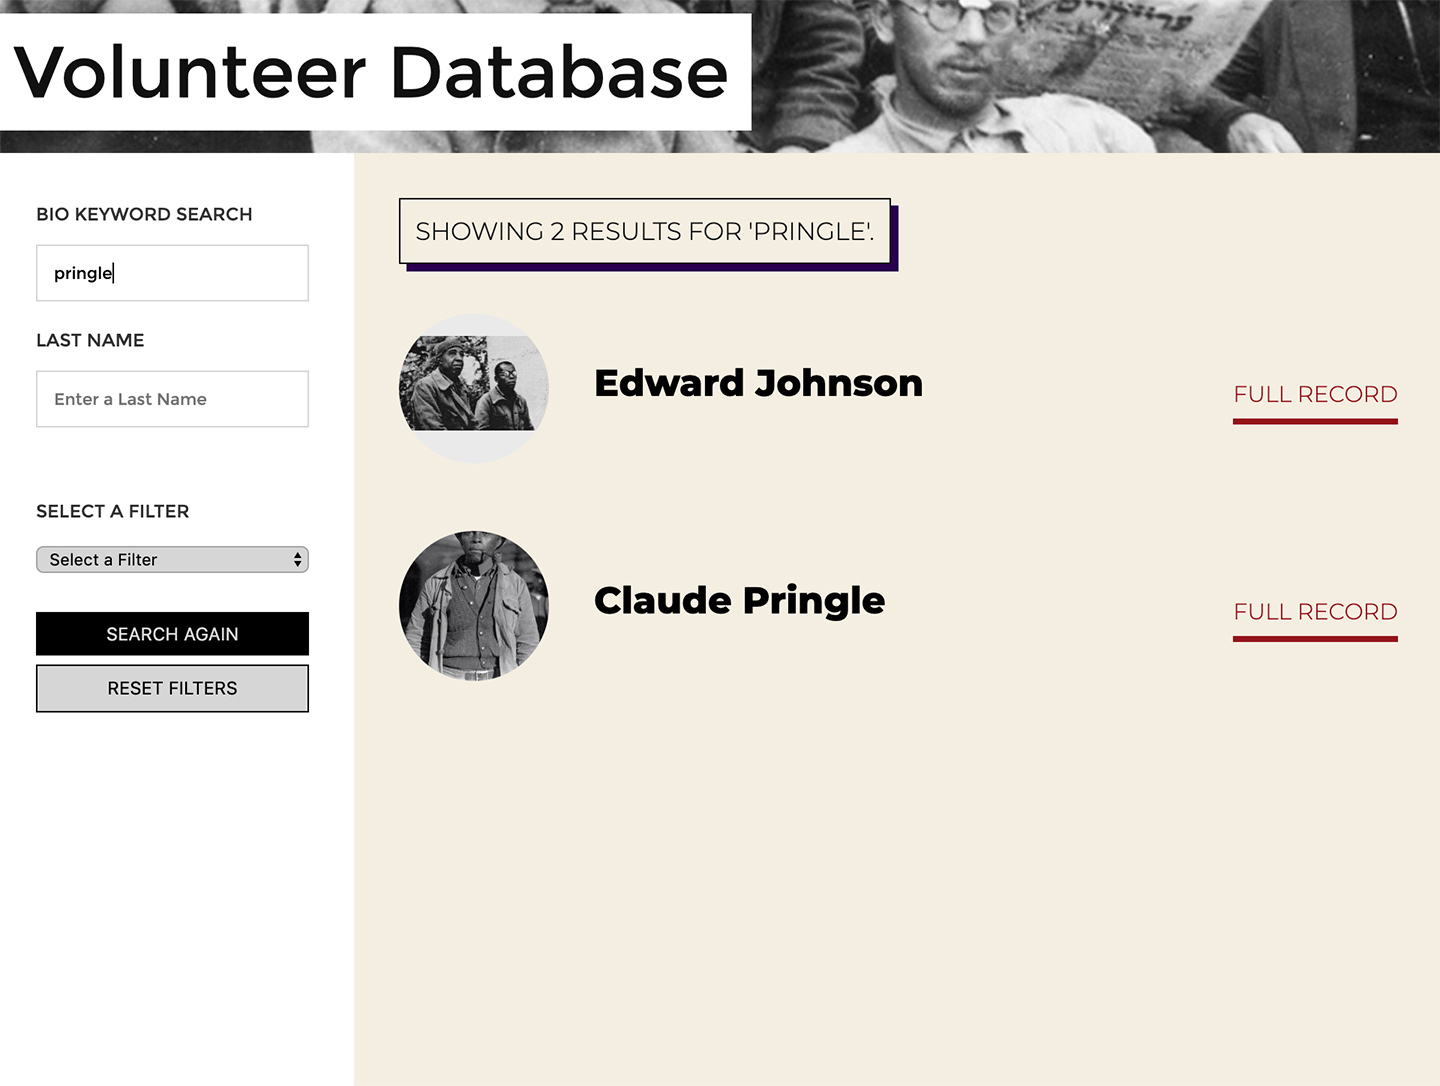 The Abraham Lincoln Brigade Archives (ALBA): Volunteer Database Results View